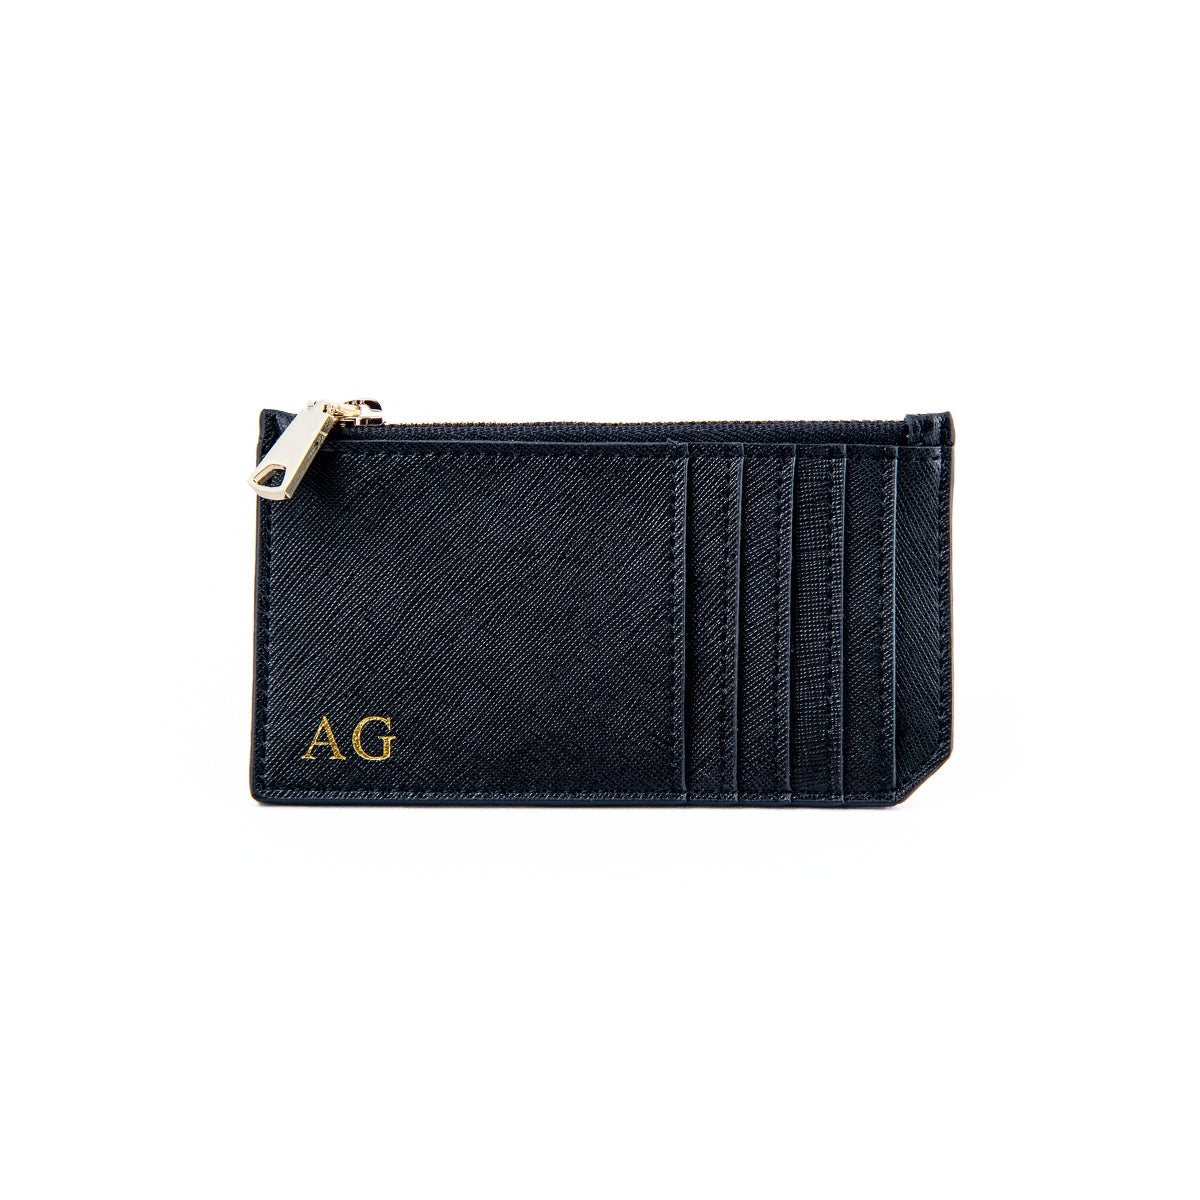 Personalised Black Saffiano Leather Zipped Card Case